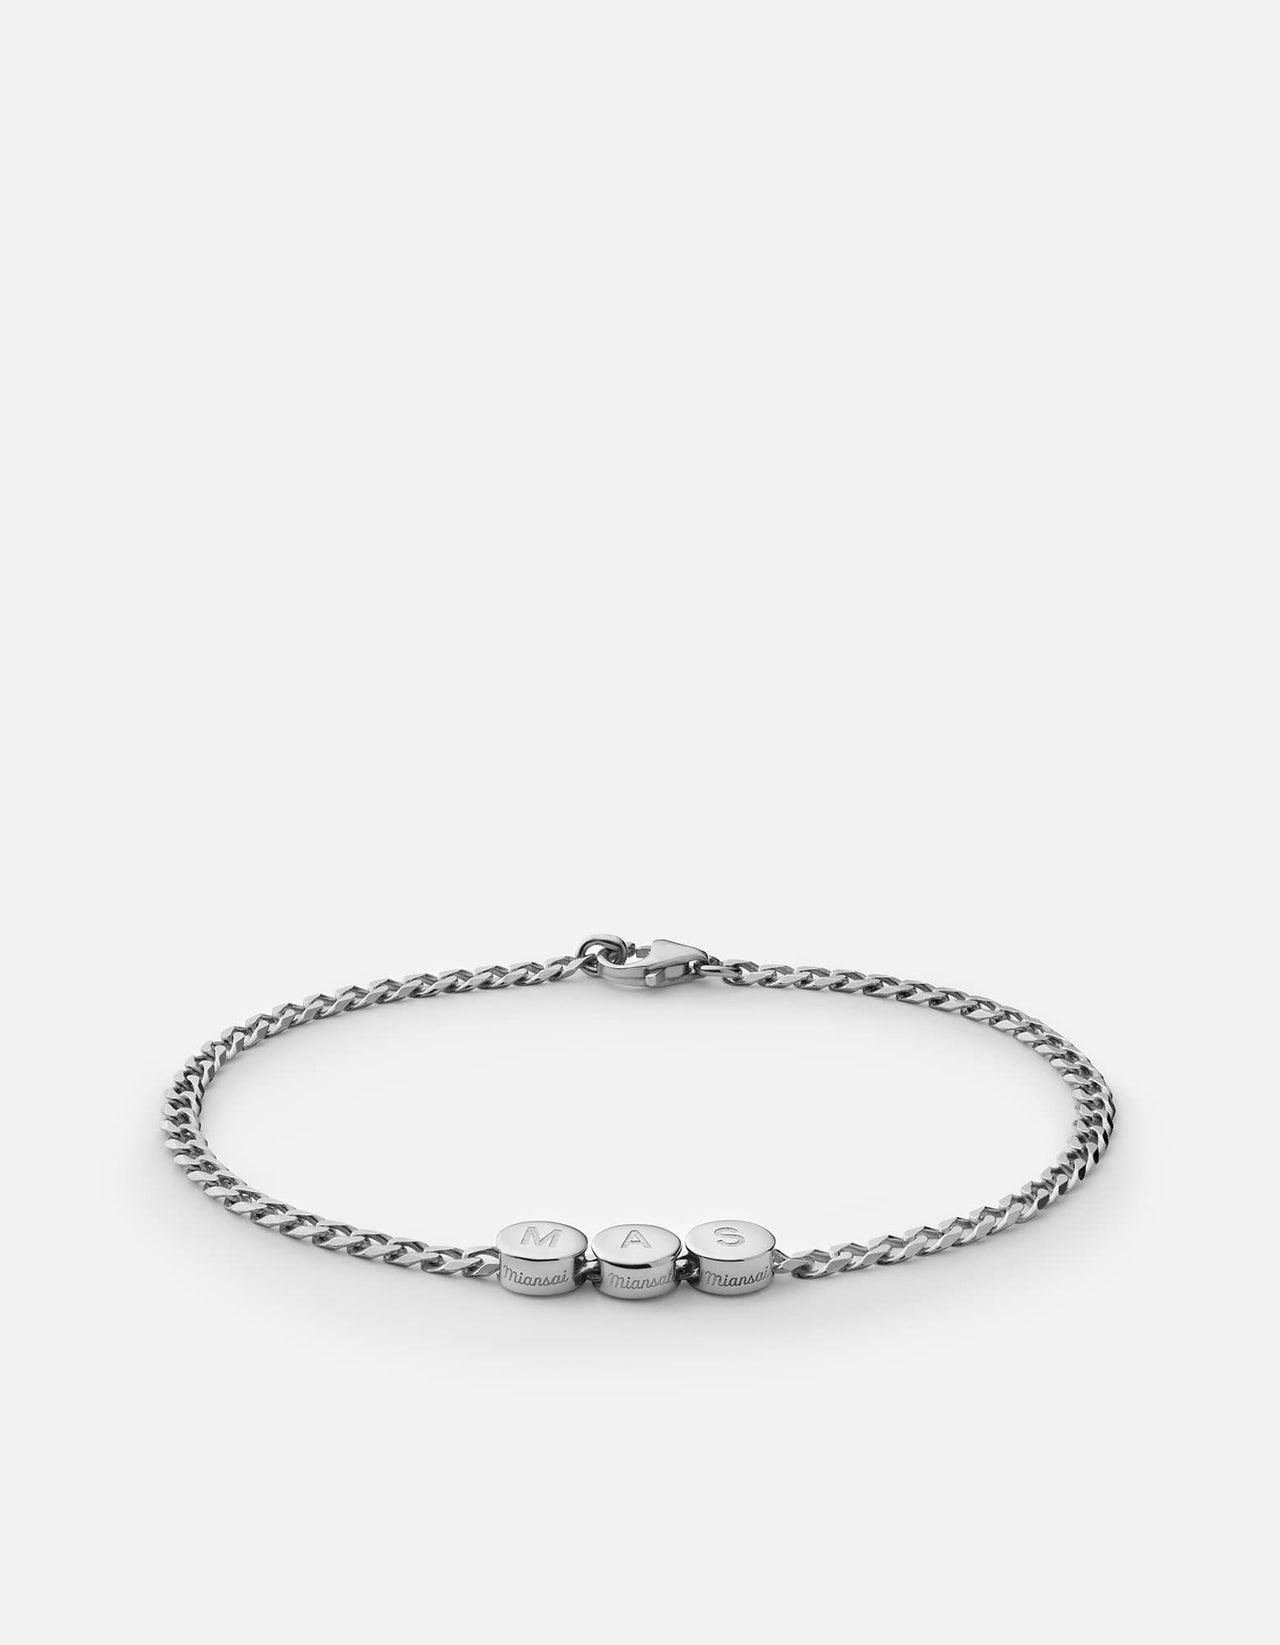 92.5 Oxidised Silver Flat Chain Type Bracelet - Silver Palace